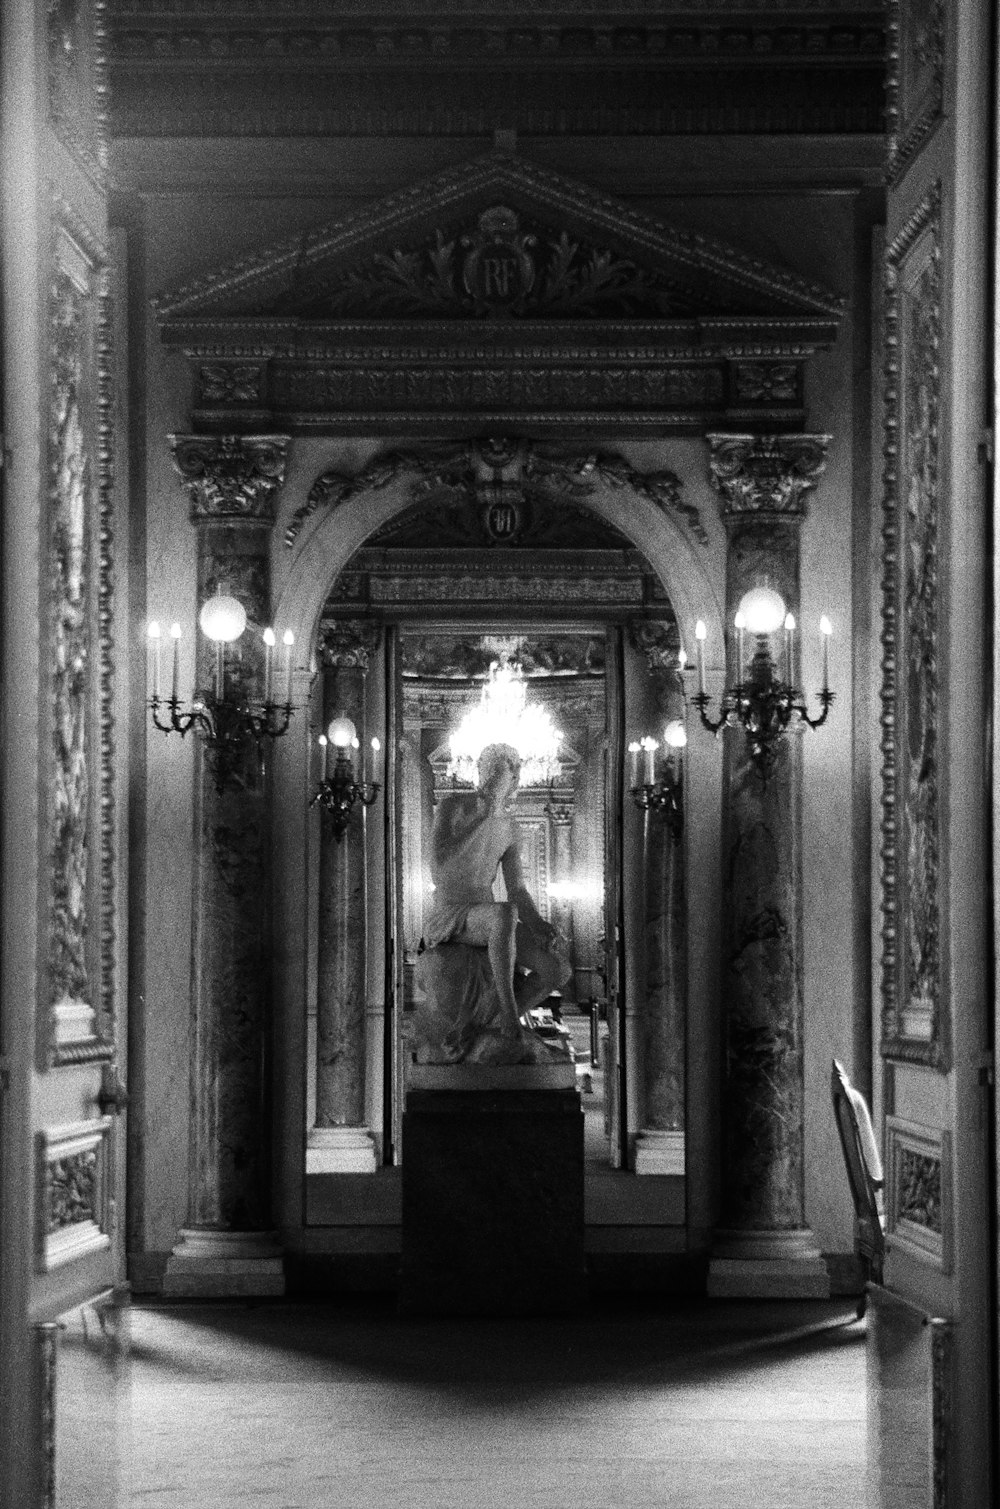 a black and white photo of a statue in a building